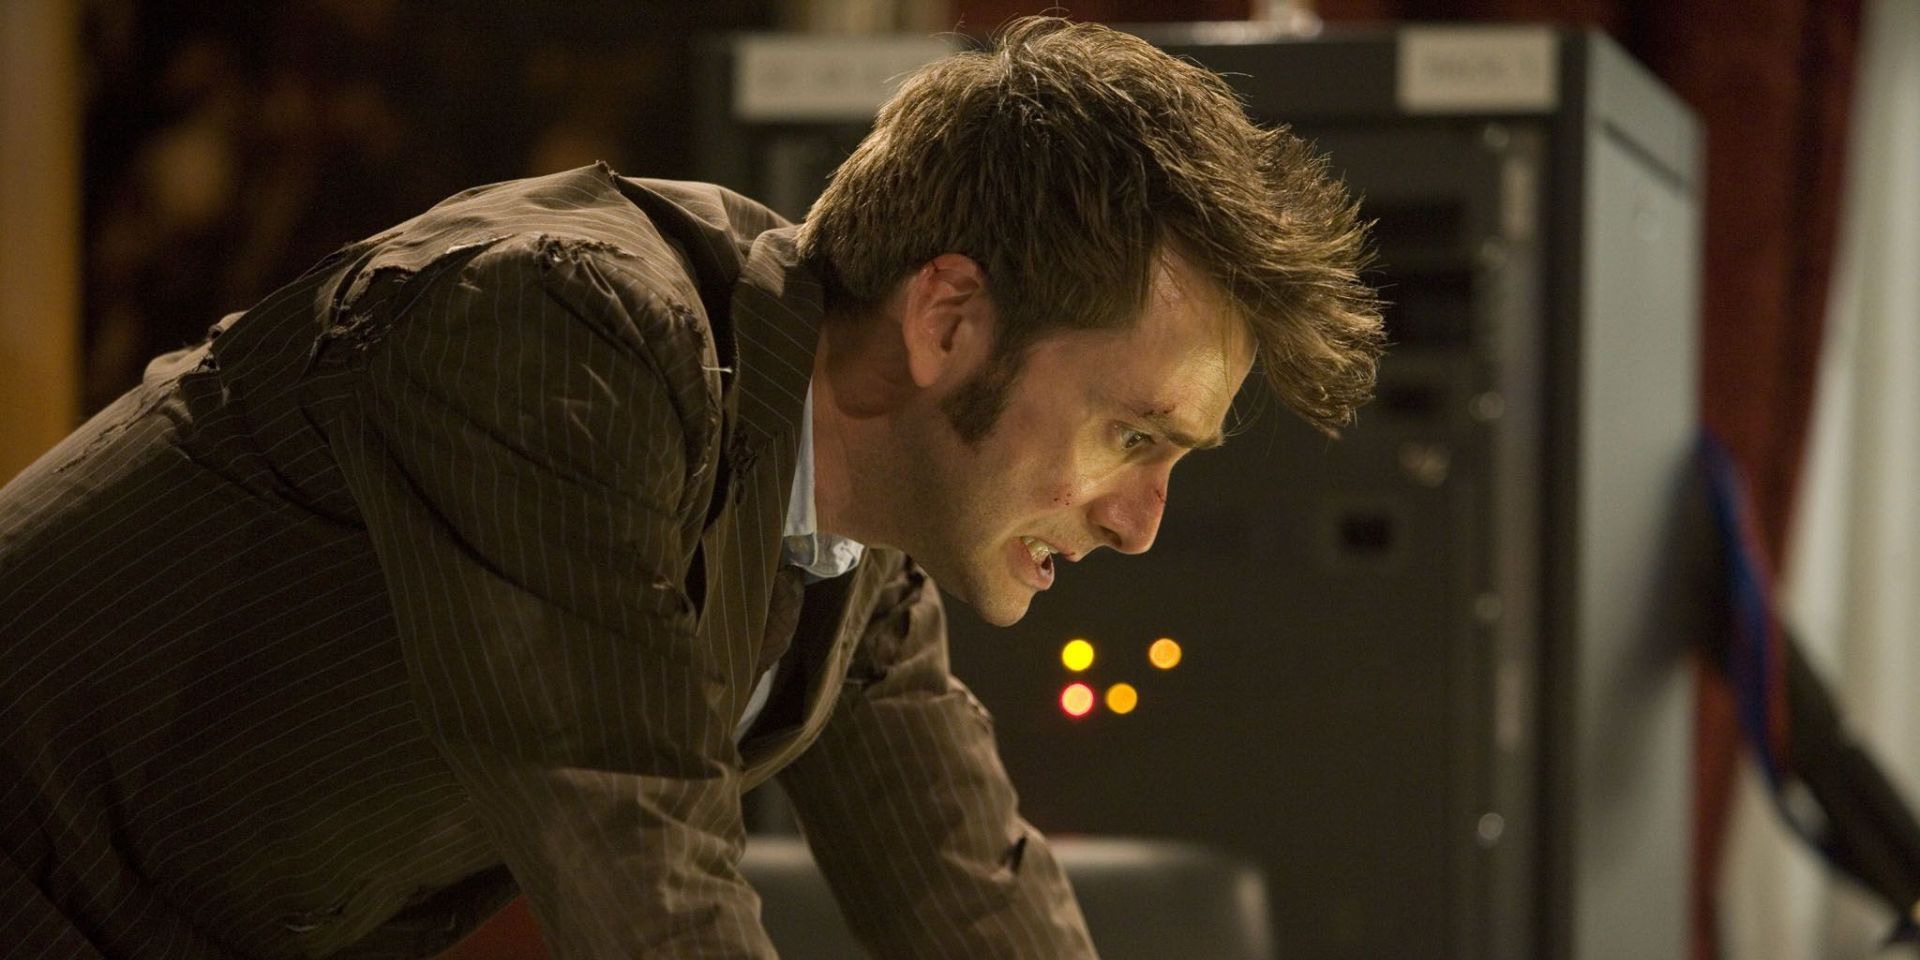 David Tennant as the Doctor in The End of Time Doctor Who episode